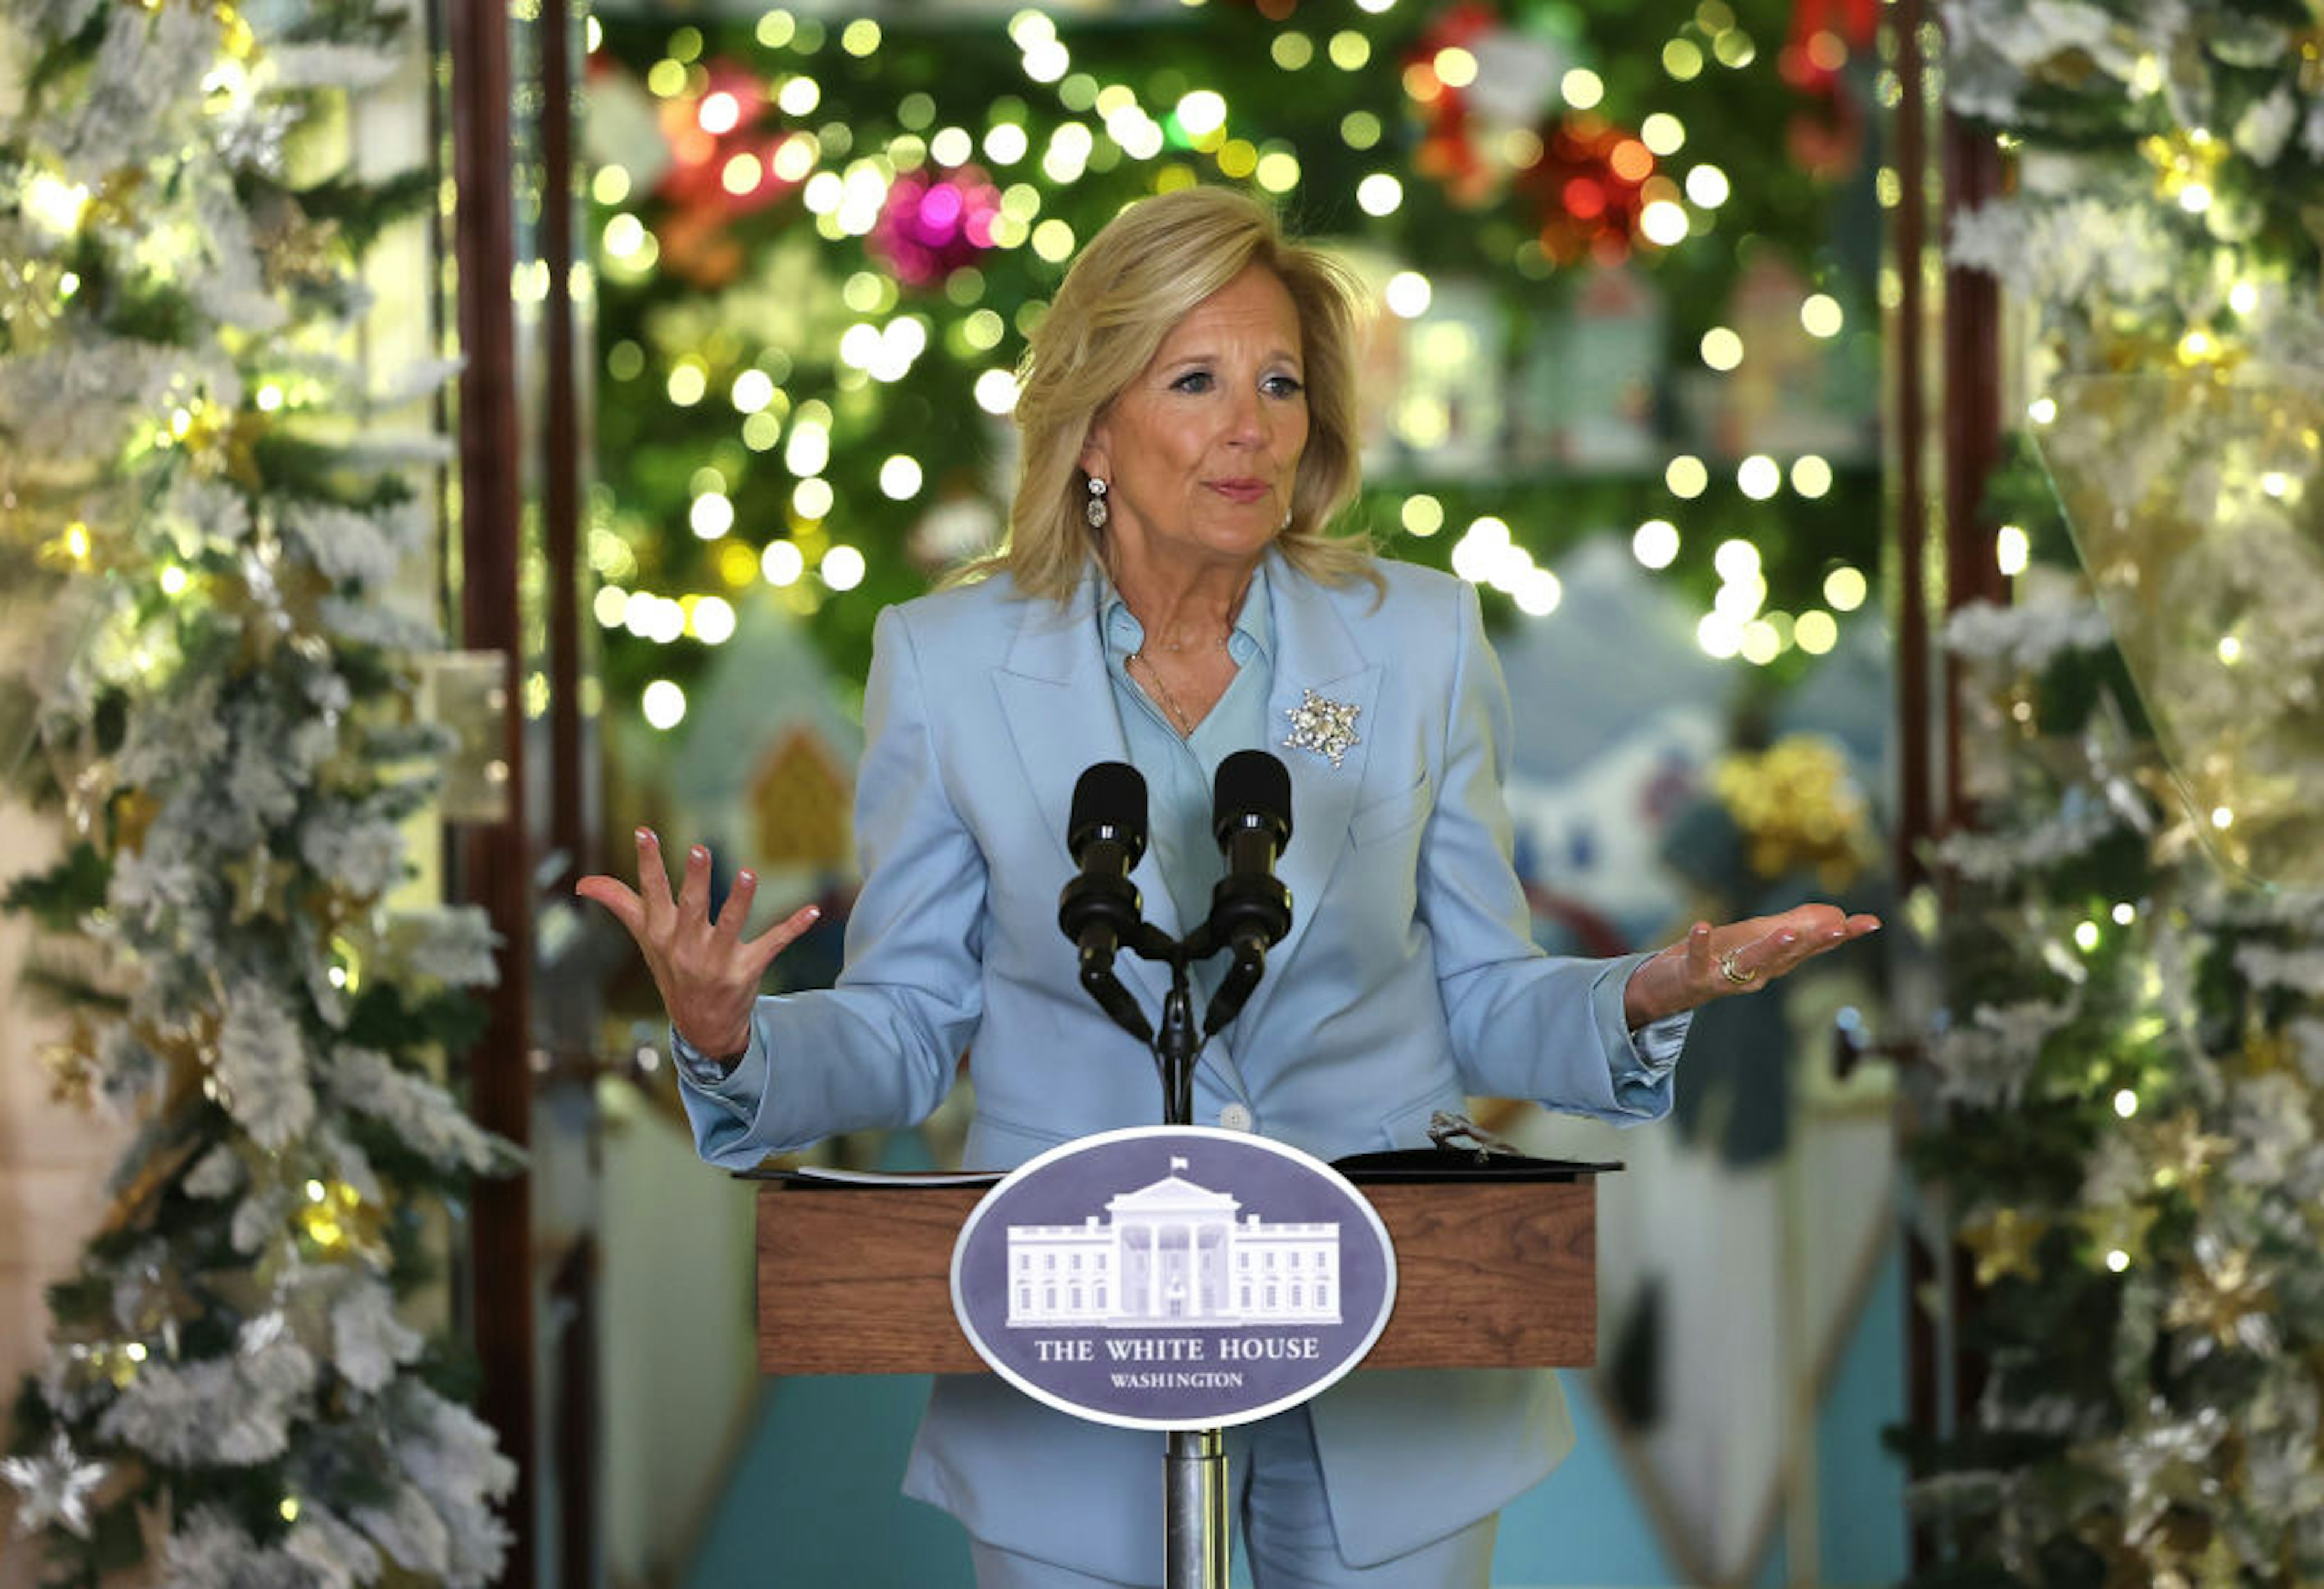 WASHINGTON, DC - NOVEMBER 27: First lady Jill Biden speaks about the holiday season and unveils the White House holiday decor while thanking volunteers who helped set it up, at the White House on November 27, 2023 in Washington, DC. The theme for this year's White House decorations is “Magic, Wonder and Joy,” and is designed to capture the “delight and imagination of childhood.” The White House expects to welcome approximately 100,000 visitors during the holiday season. (Photo by Kevin Dietsch/Getty Images)